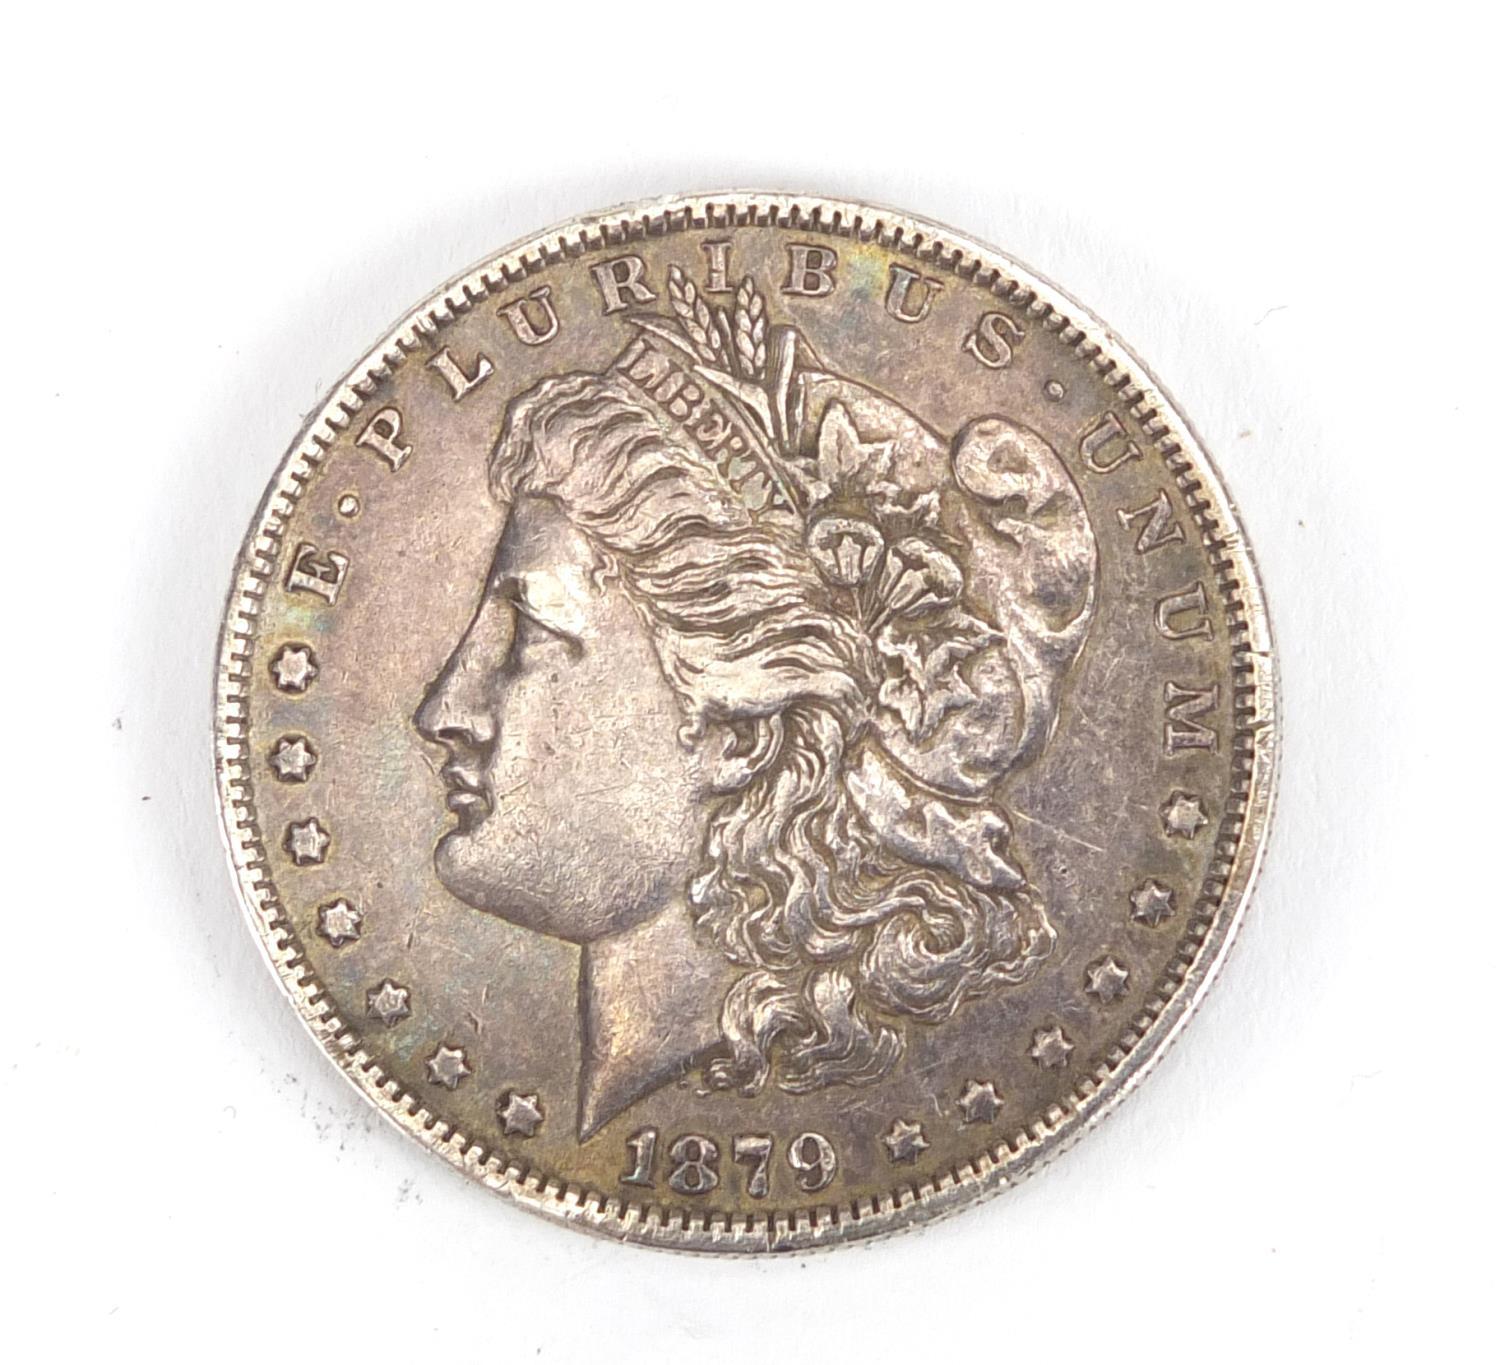 United States of America 1879 one dollar : For Further Condition Reports Please Visit Our Website